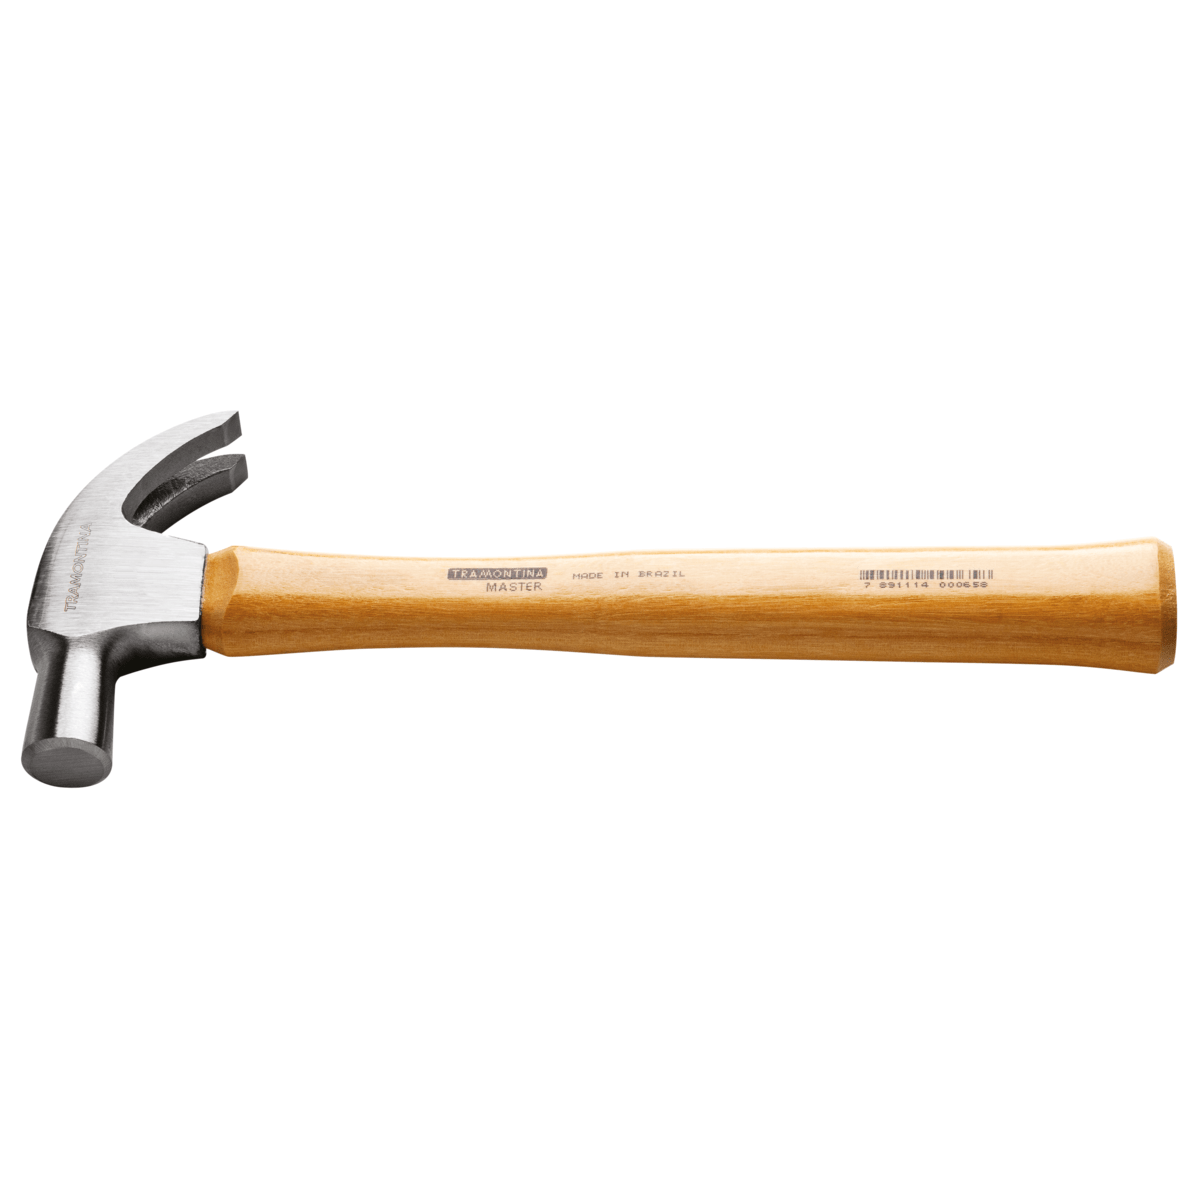 Tramontina Polished Wood Handle Claw Hammer 400G